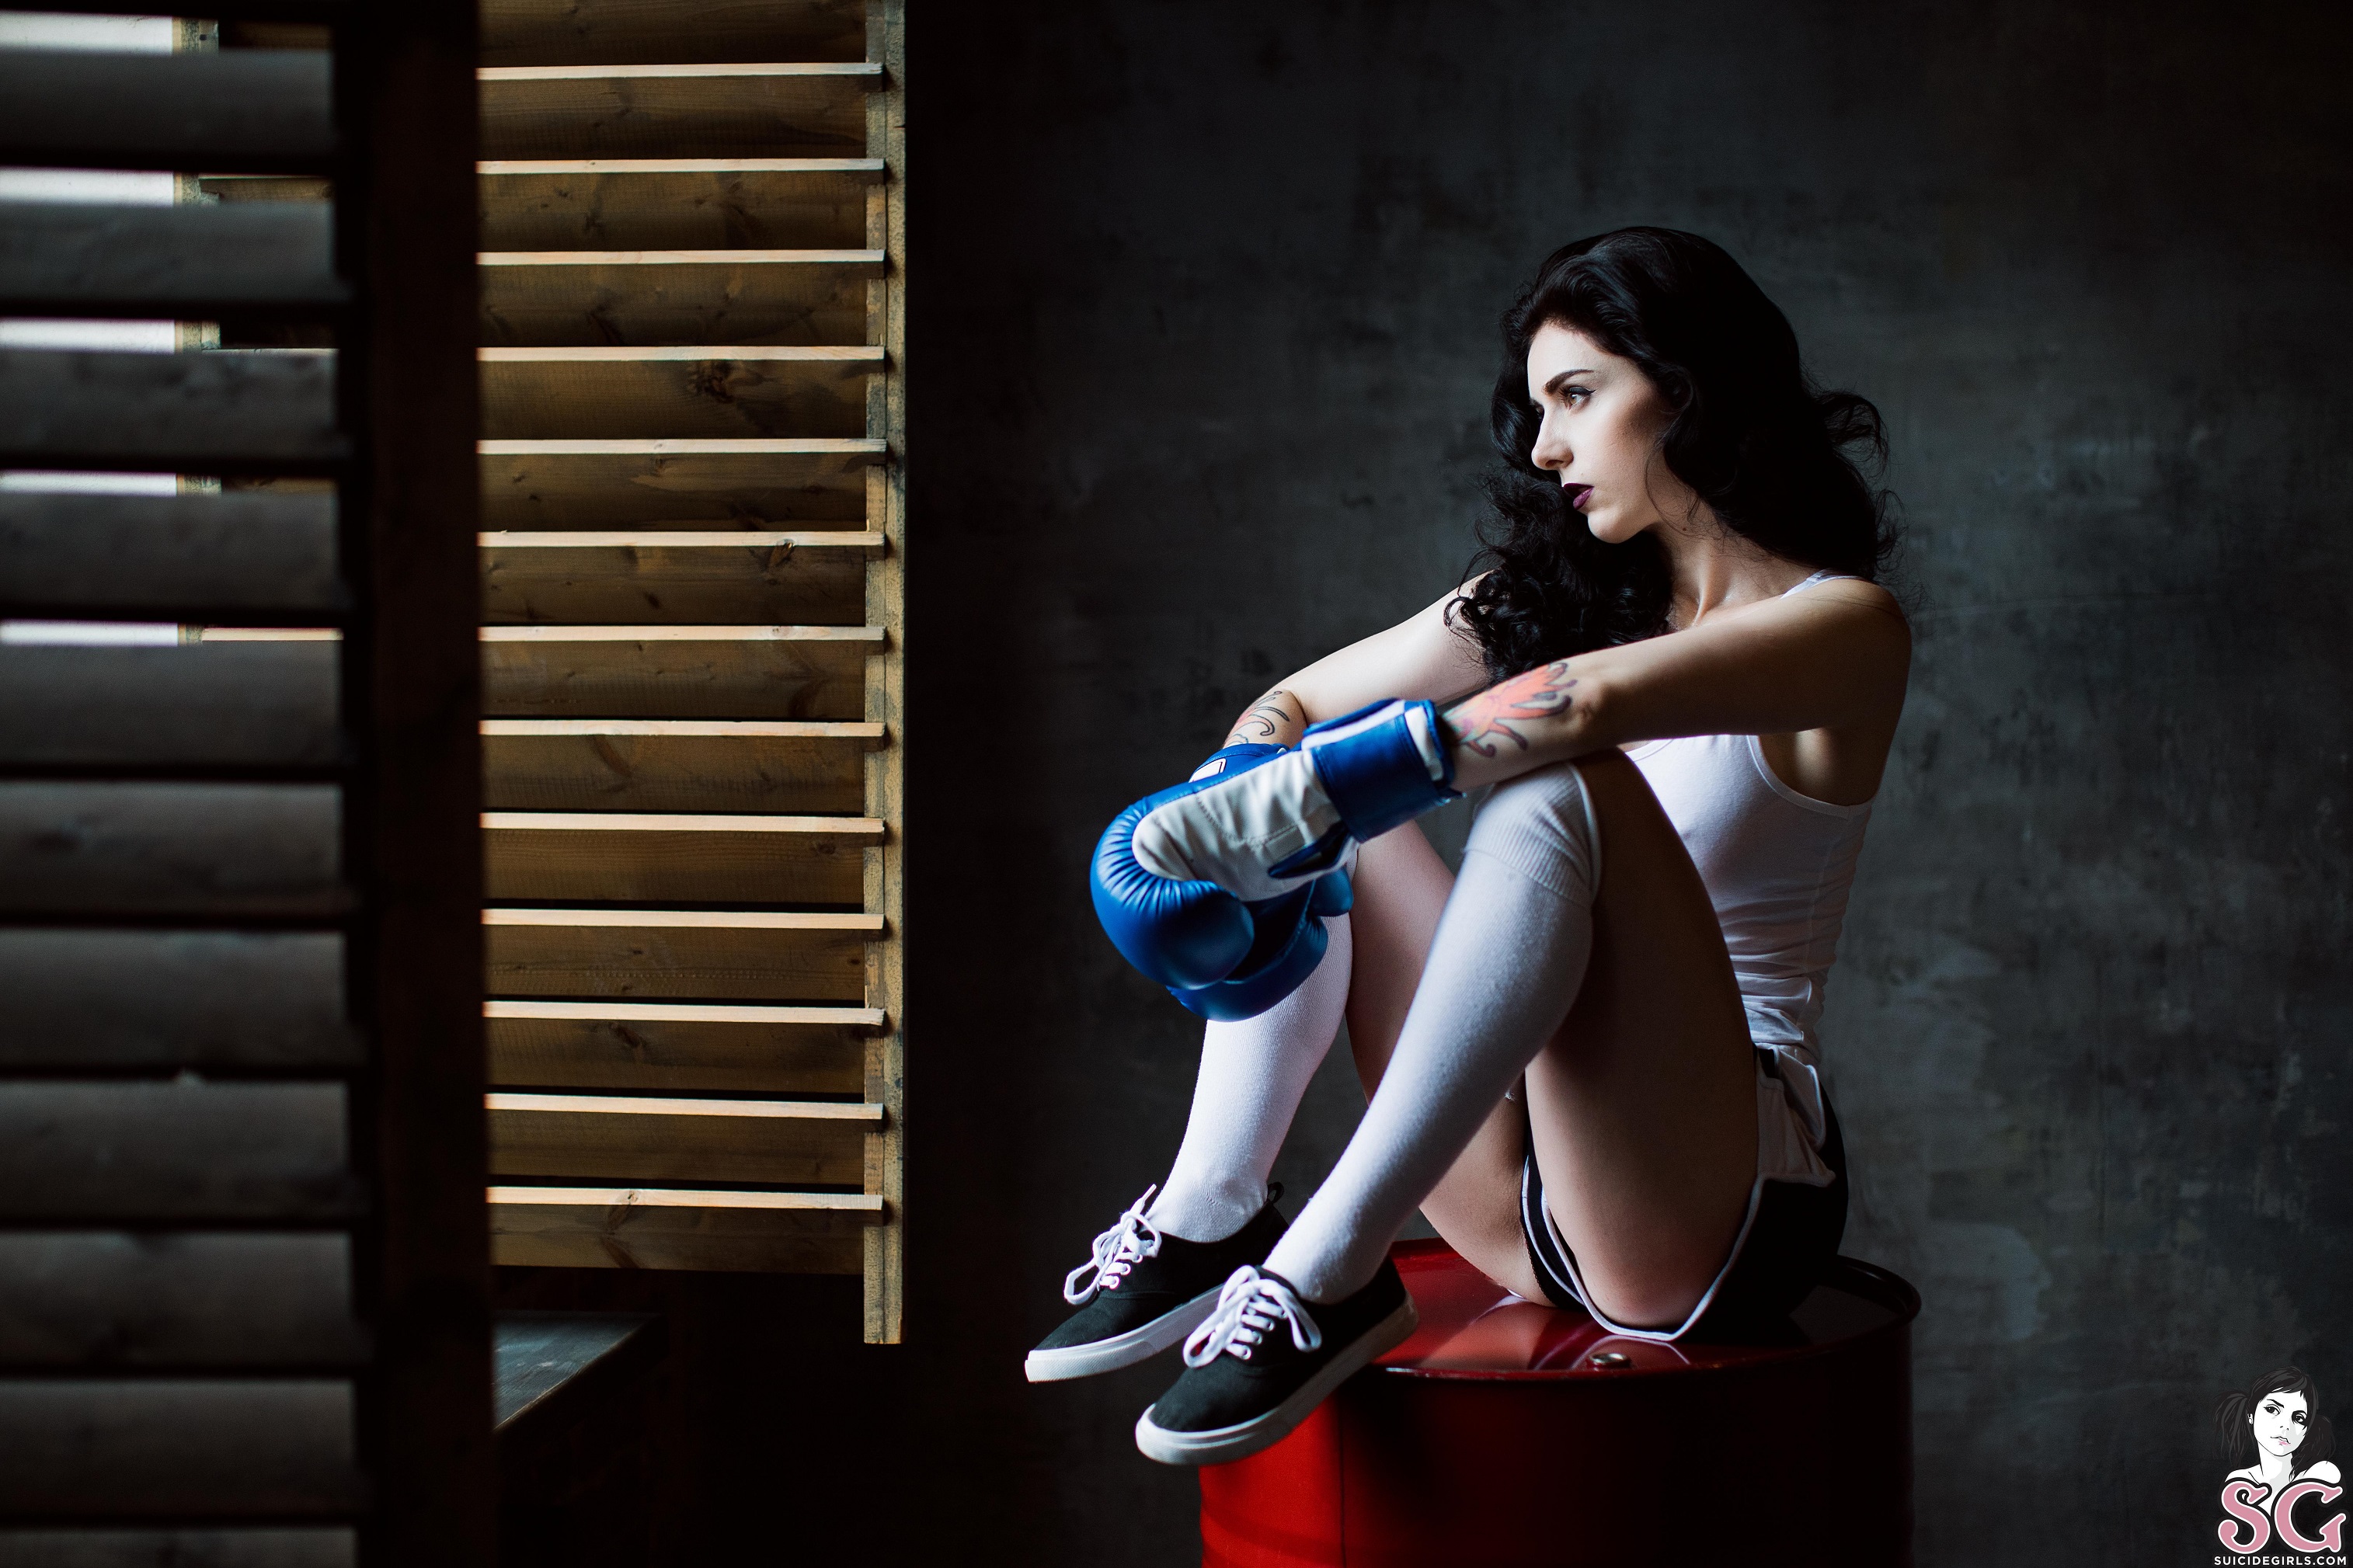 People 3029x2019 Elliemouse women model brunette profile pale lipstick white tops short shorts socks sneakers boxing gloves sitting barrels looking away parted lips tattoo indoors women indoors Suicide Girls white socks knee high socks looking sideways boxing